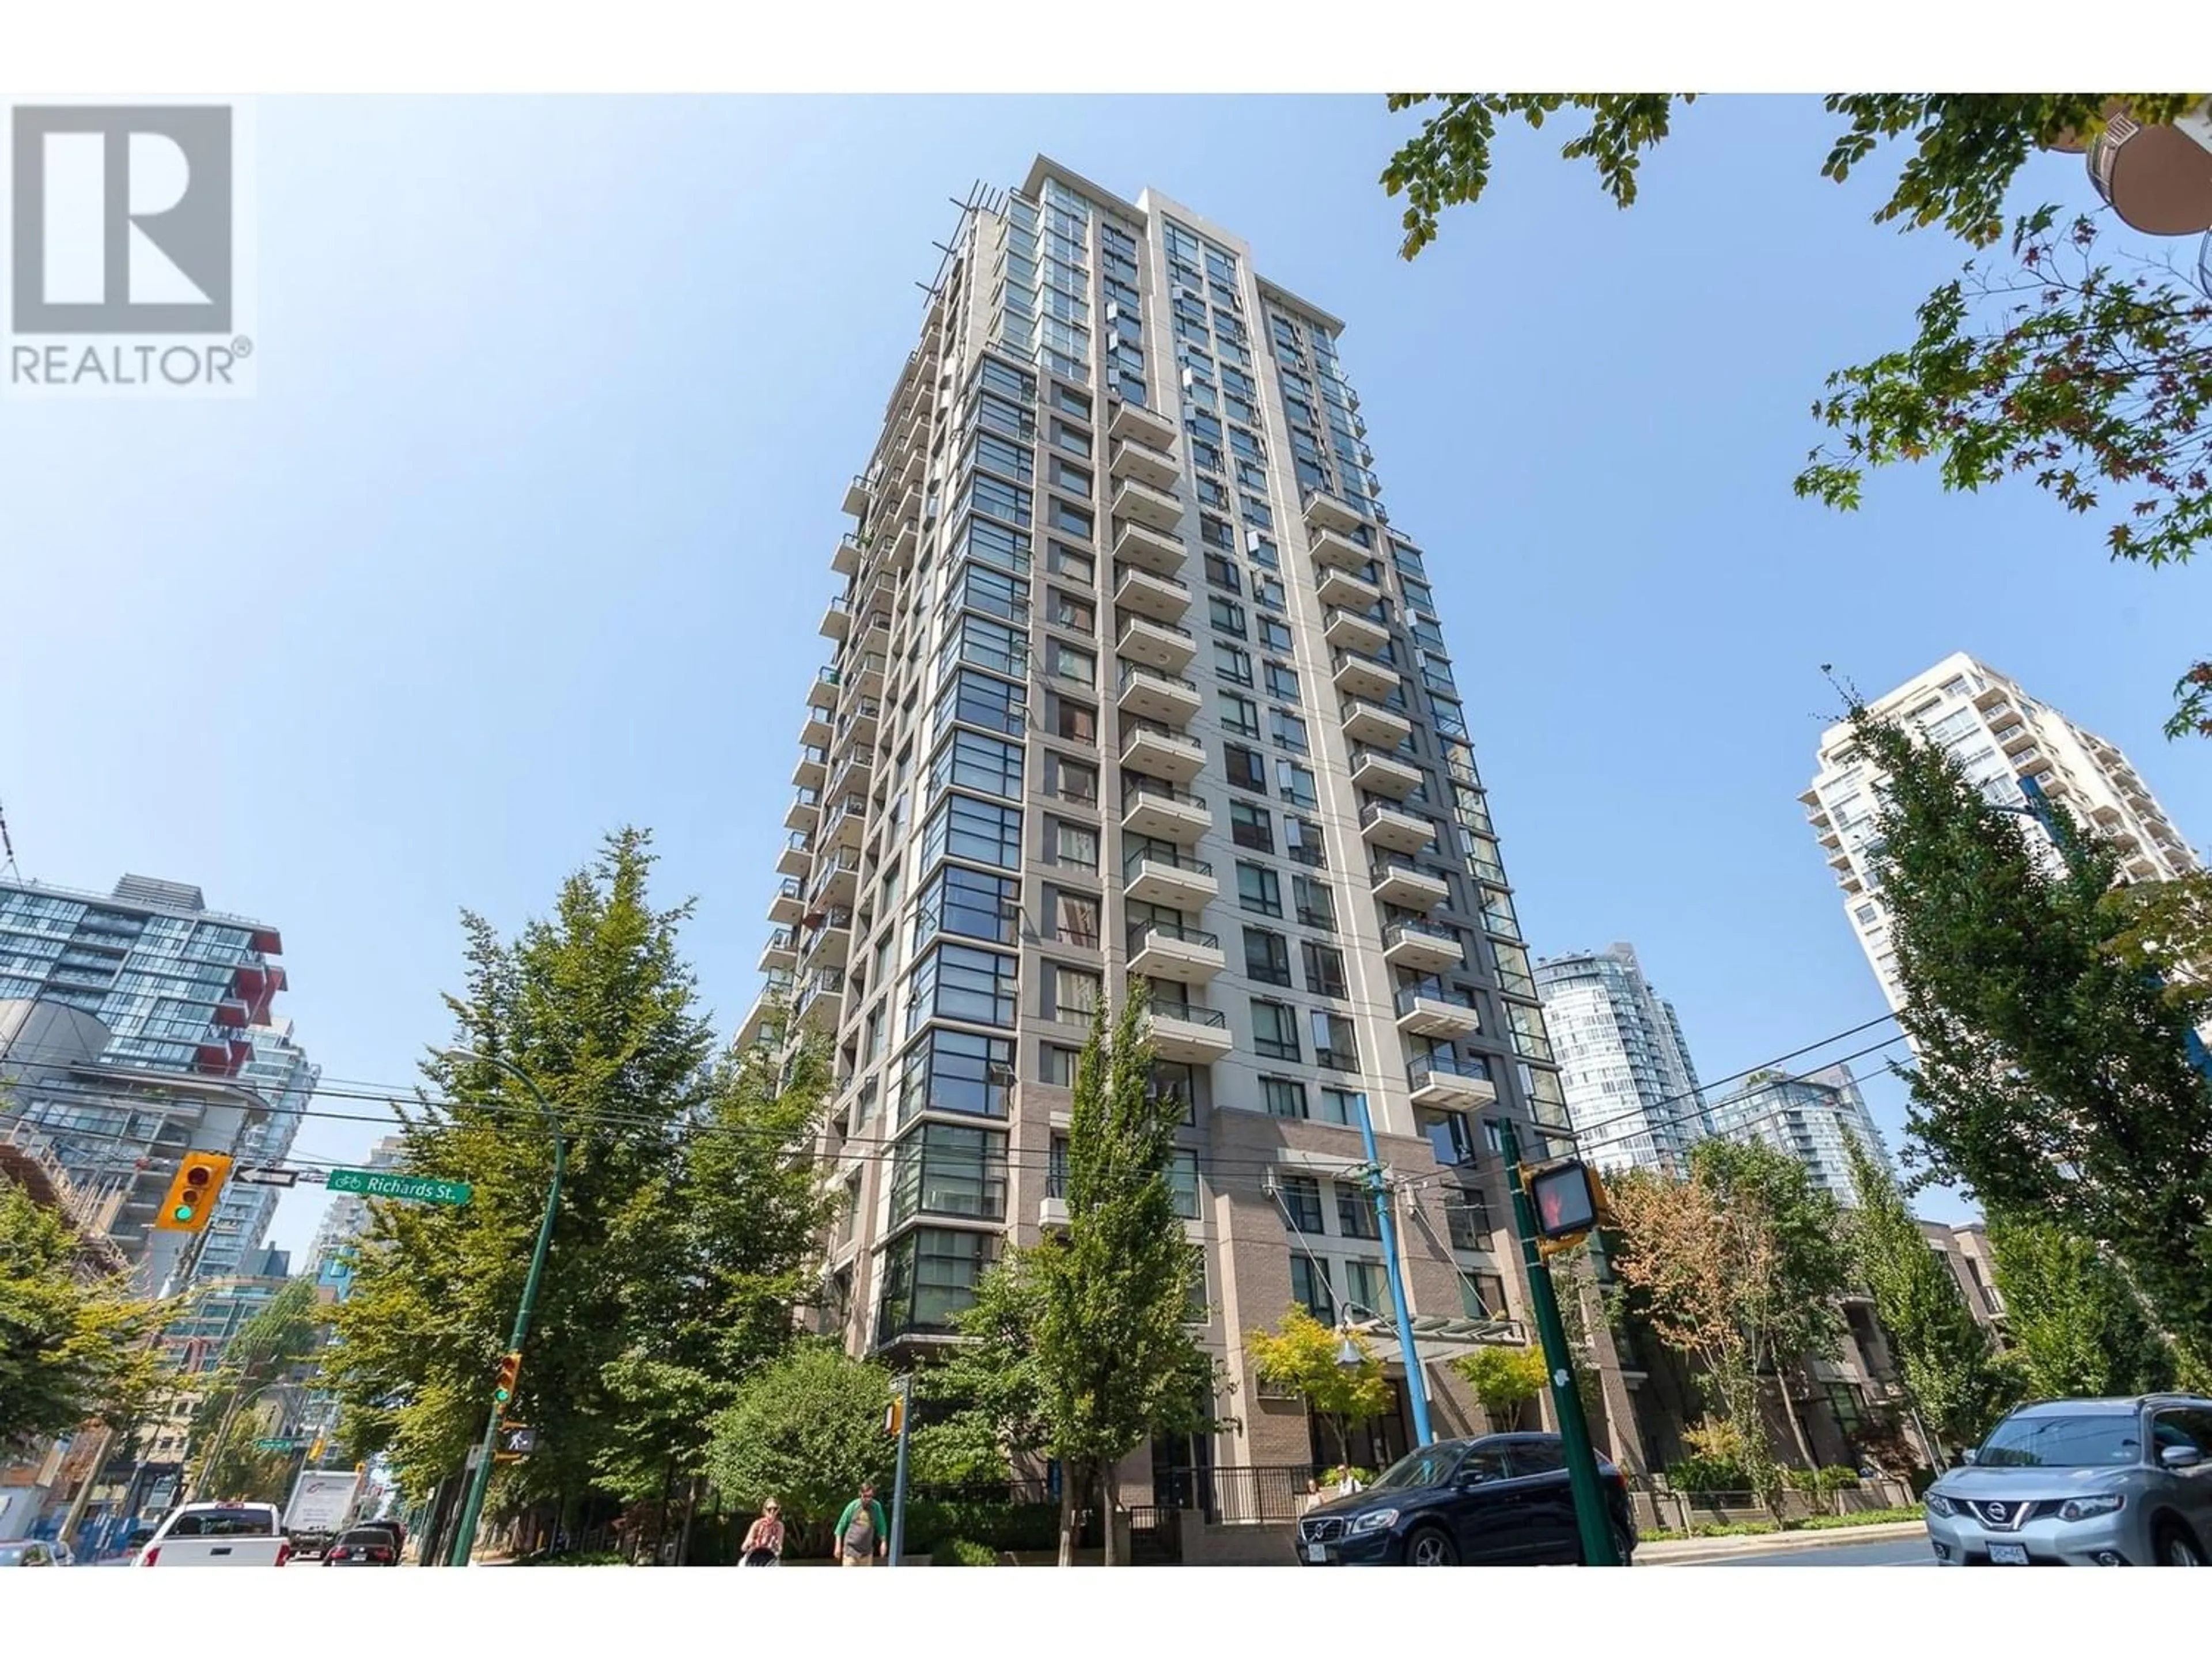 A pic from exterior of the house or condo for 604 1295 RICHARDS STREET, Vancouver British Columbia V6B1B7